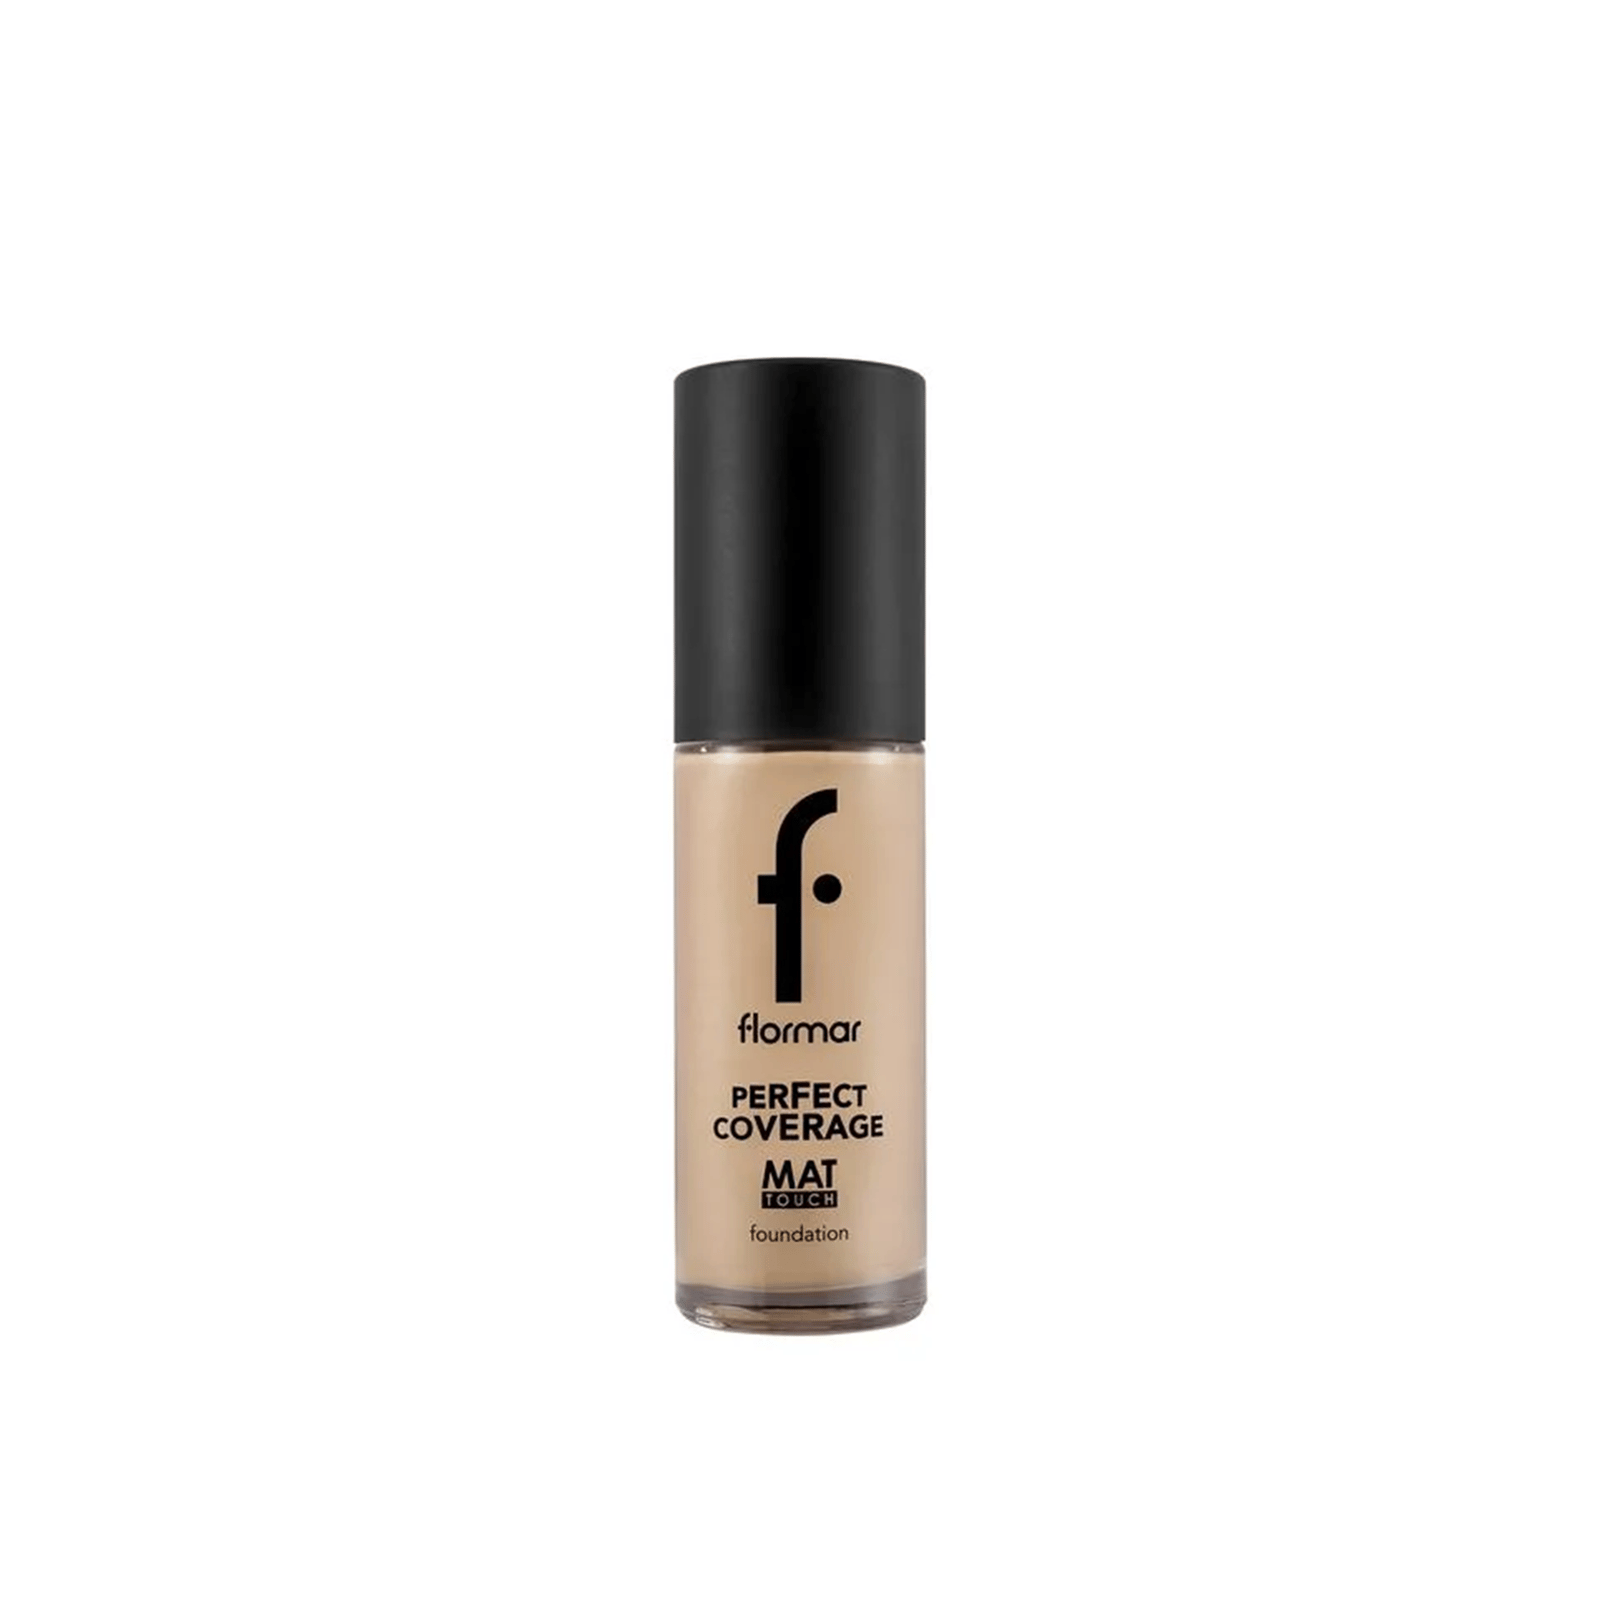 Flormar Perfect Coverage Mat Touch Foundation 321 Natural Pastelle 30ml (1.01floz)